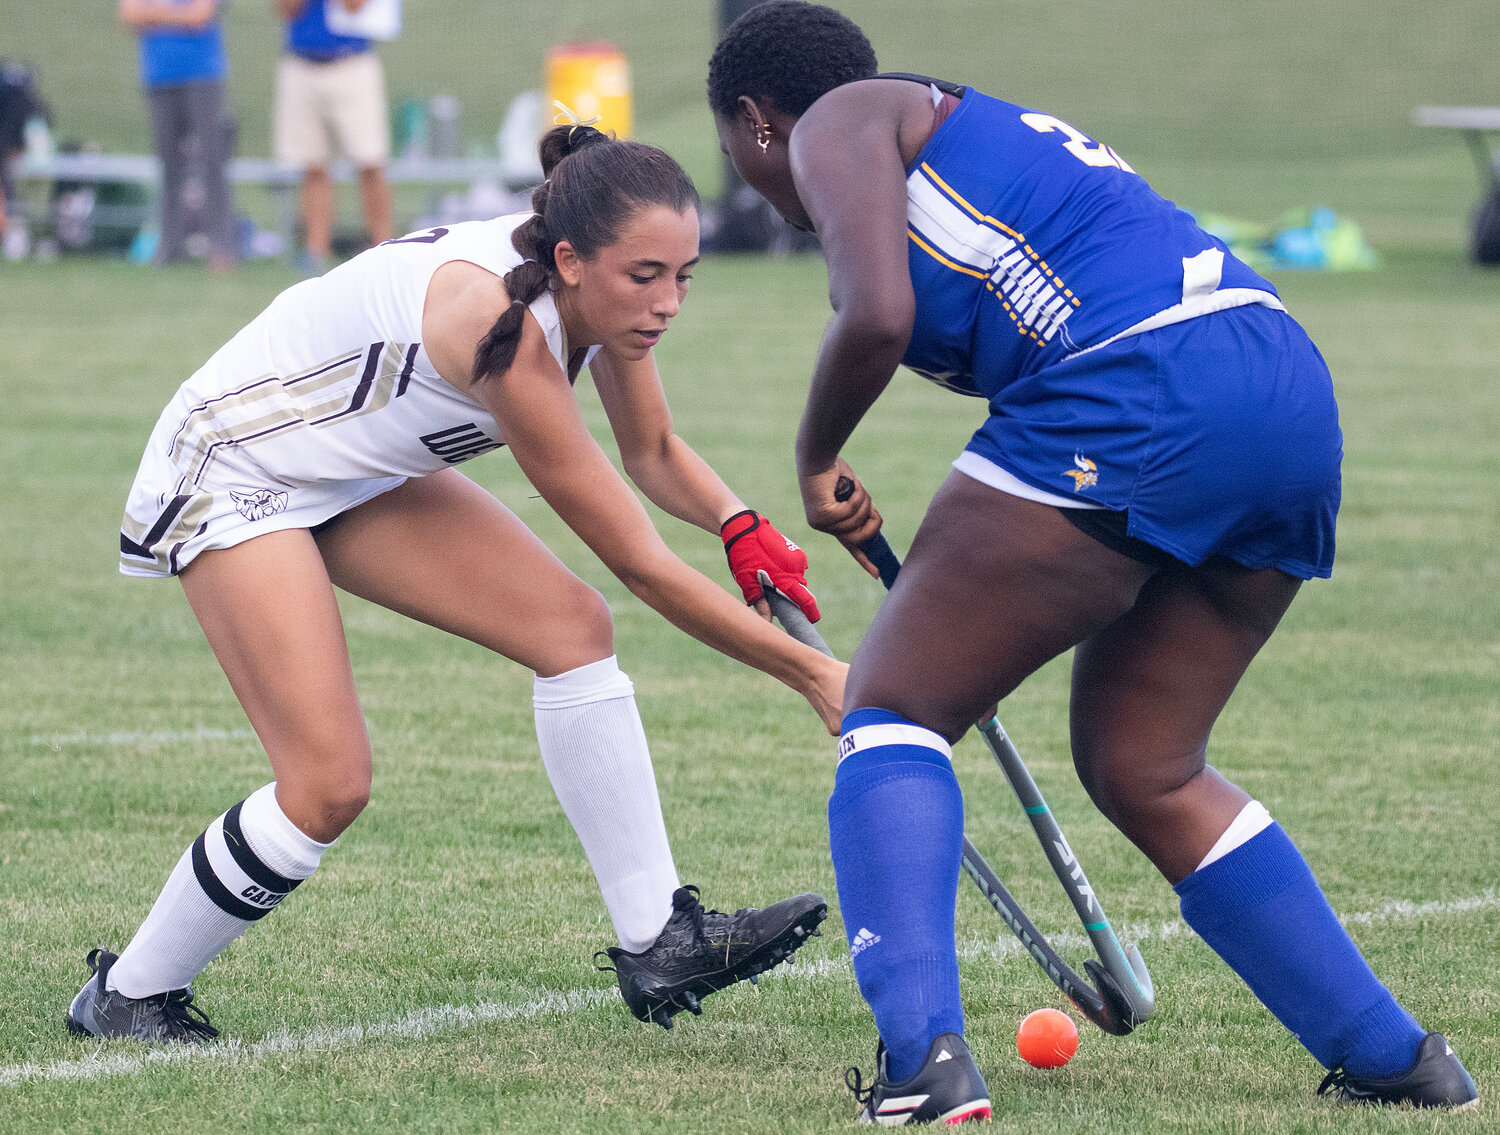 Wildcats’s senior captain Avery Avila leads the team with her gritty, tenacious play on the field.